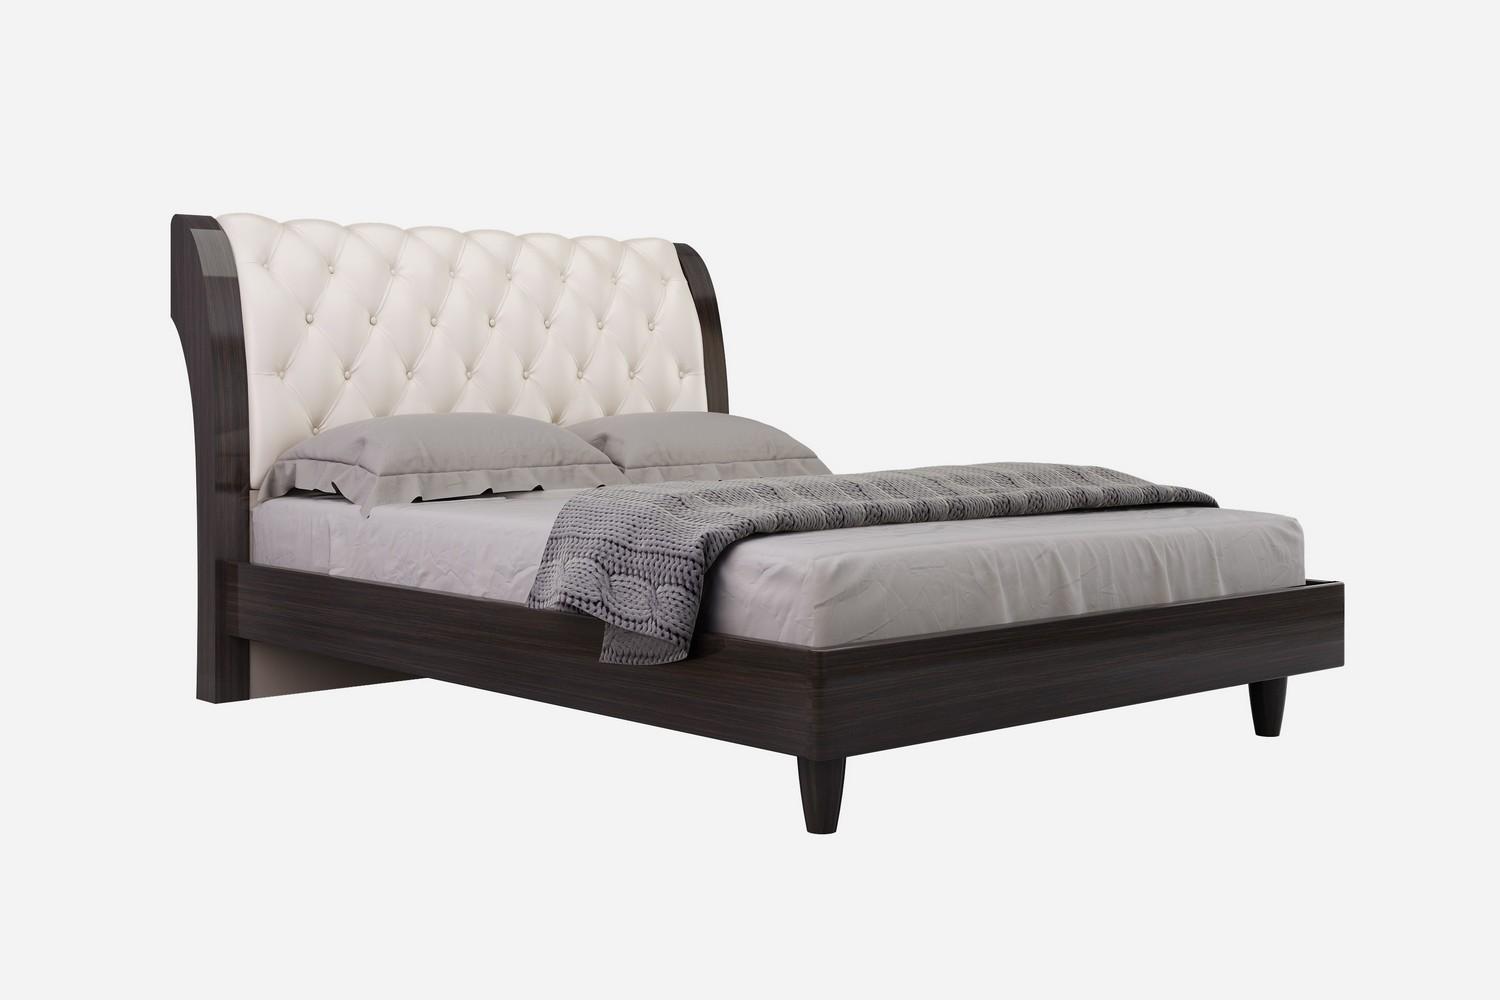 

    
Wenge Finish White Eco-Leather Tufted Queen Size Bed Paris Global United
